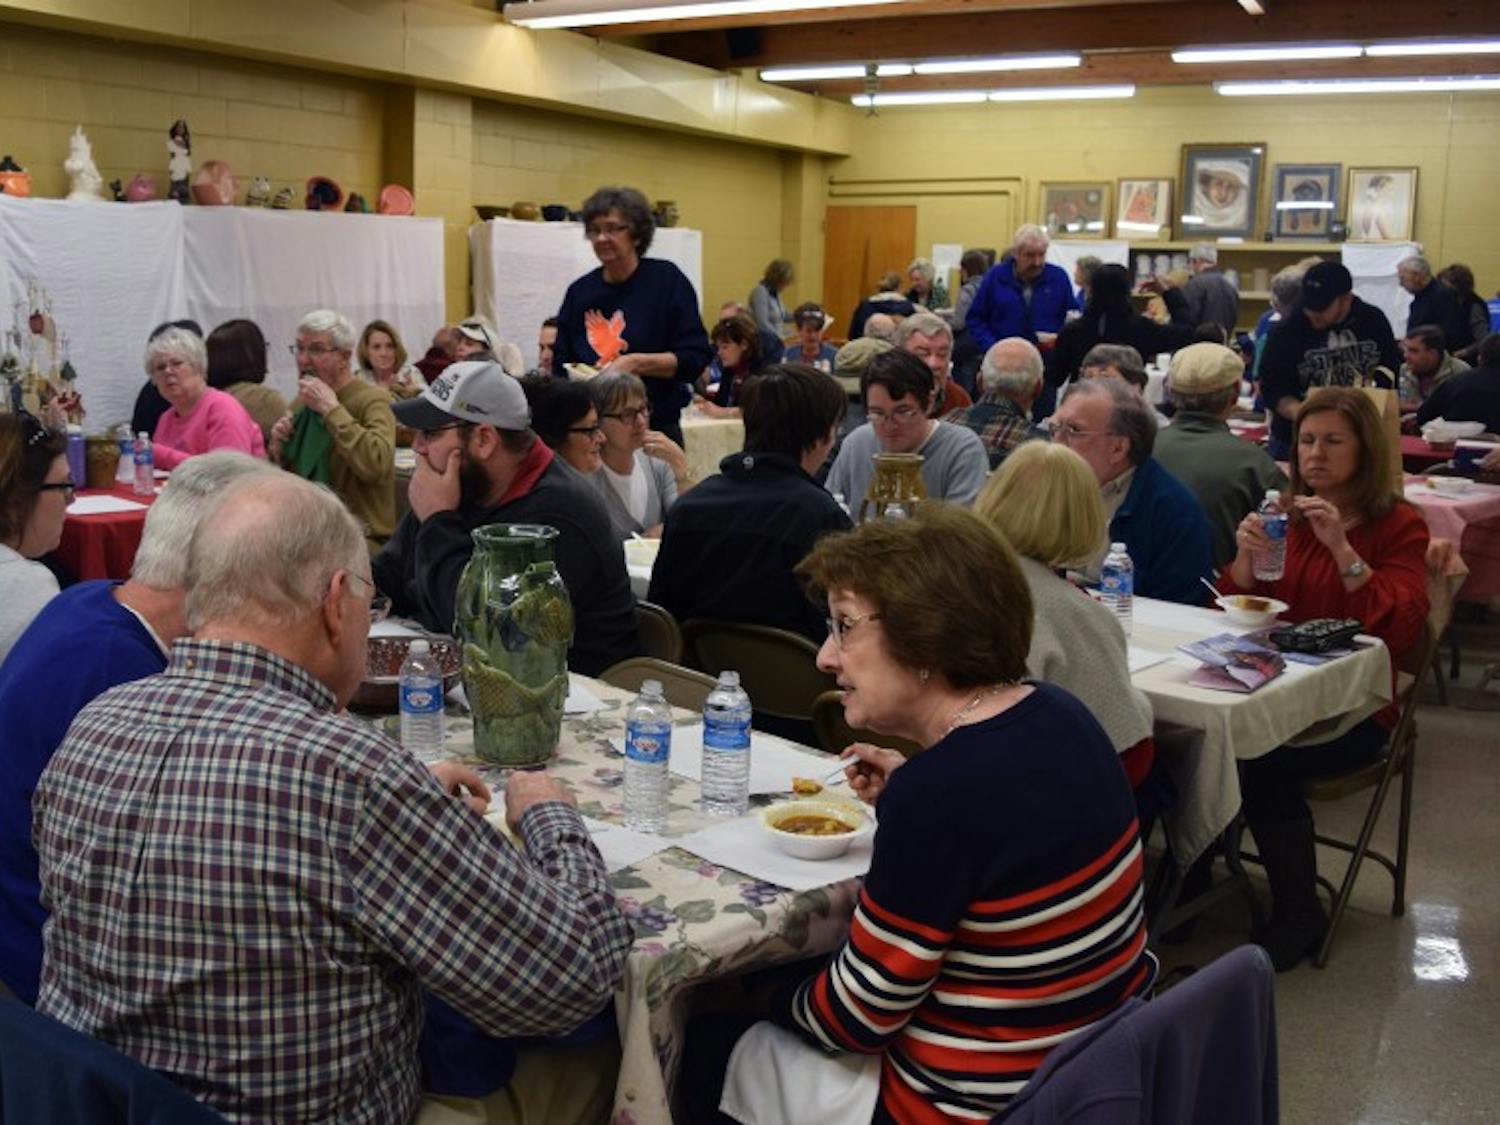 Customers enjoy their soup at the&nbsp;3rd Annual Empty Bowls event on Saturday, February 13 from 10 a.m. – 2 p.m.at the Denson Drive Recreation Studio in Opelika.